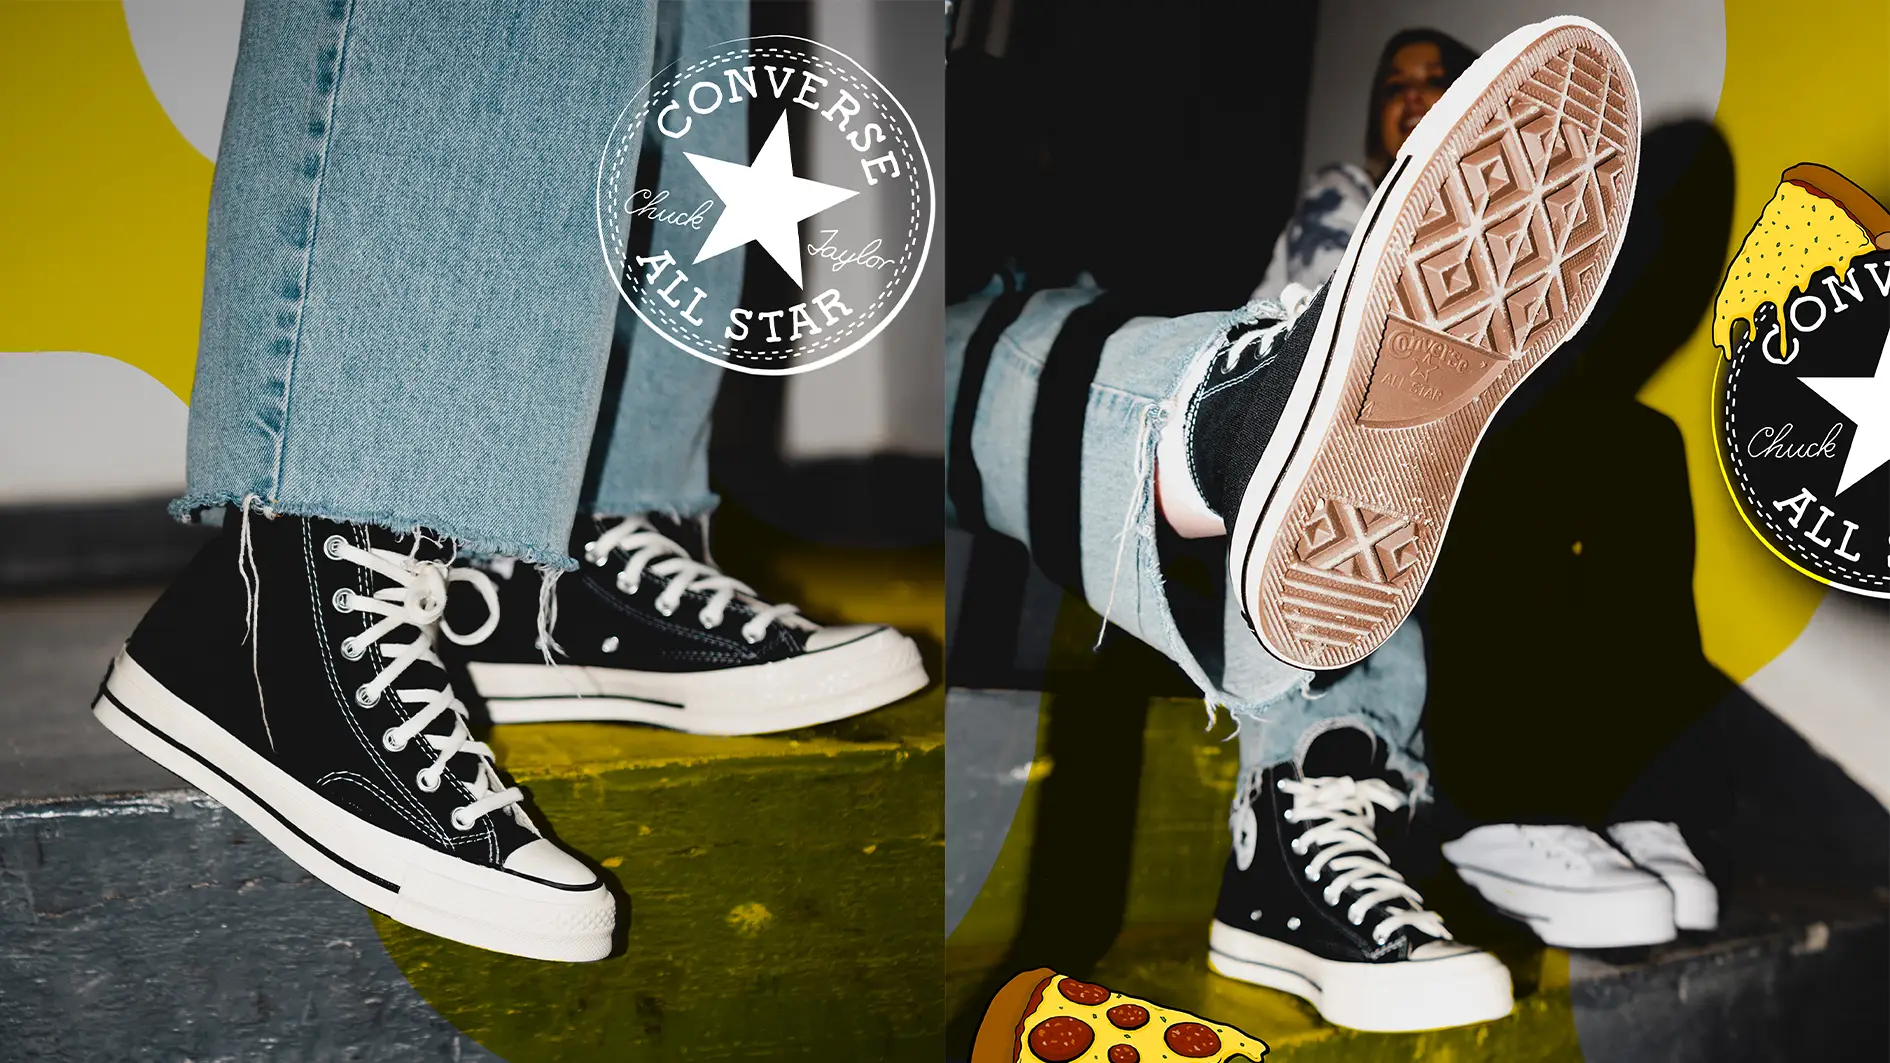 CONVERSE ALL STAR 100 STARSLIP OX WHITE Chuck Taylor Became the Cultural Icon it is Today